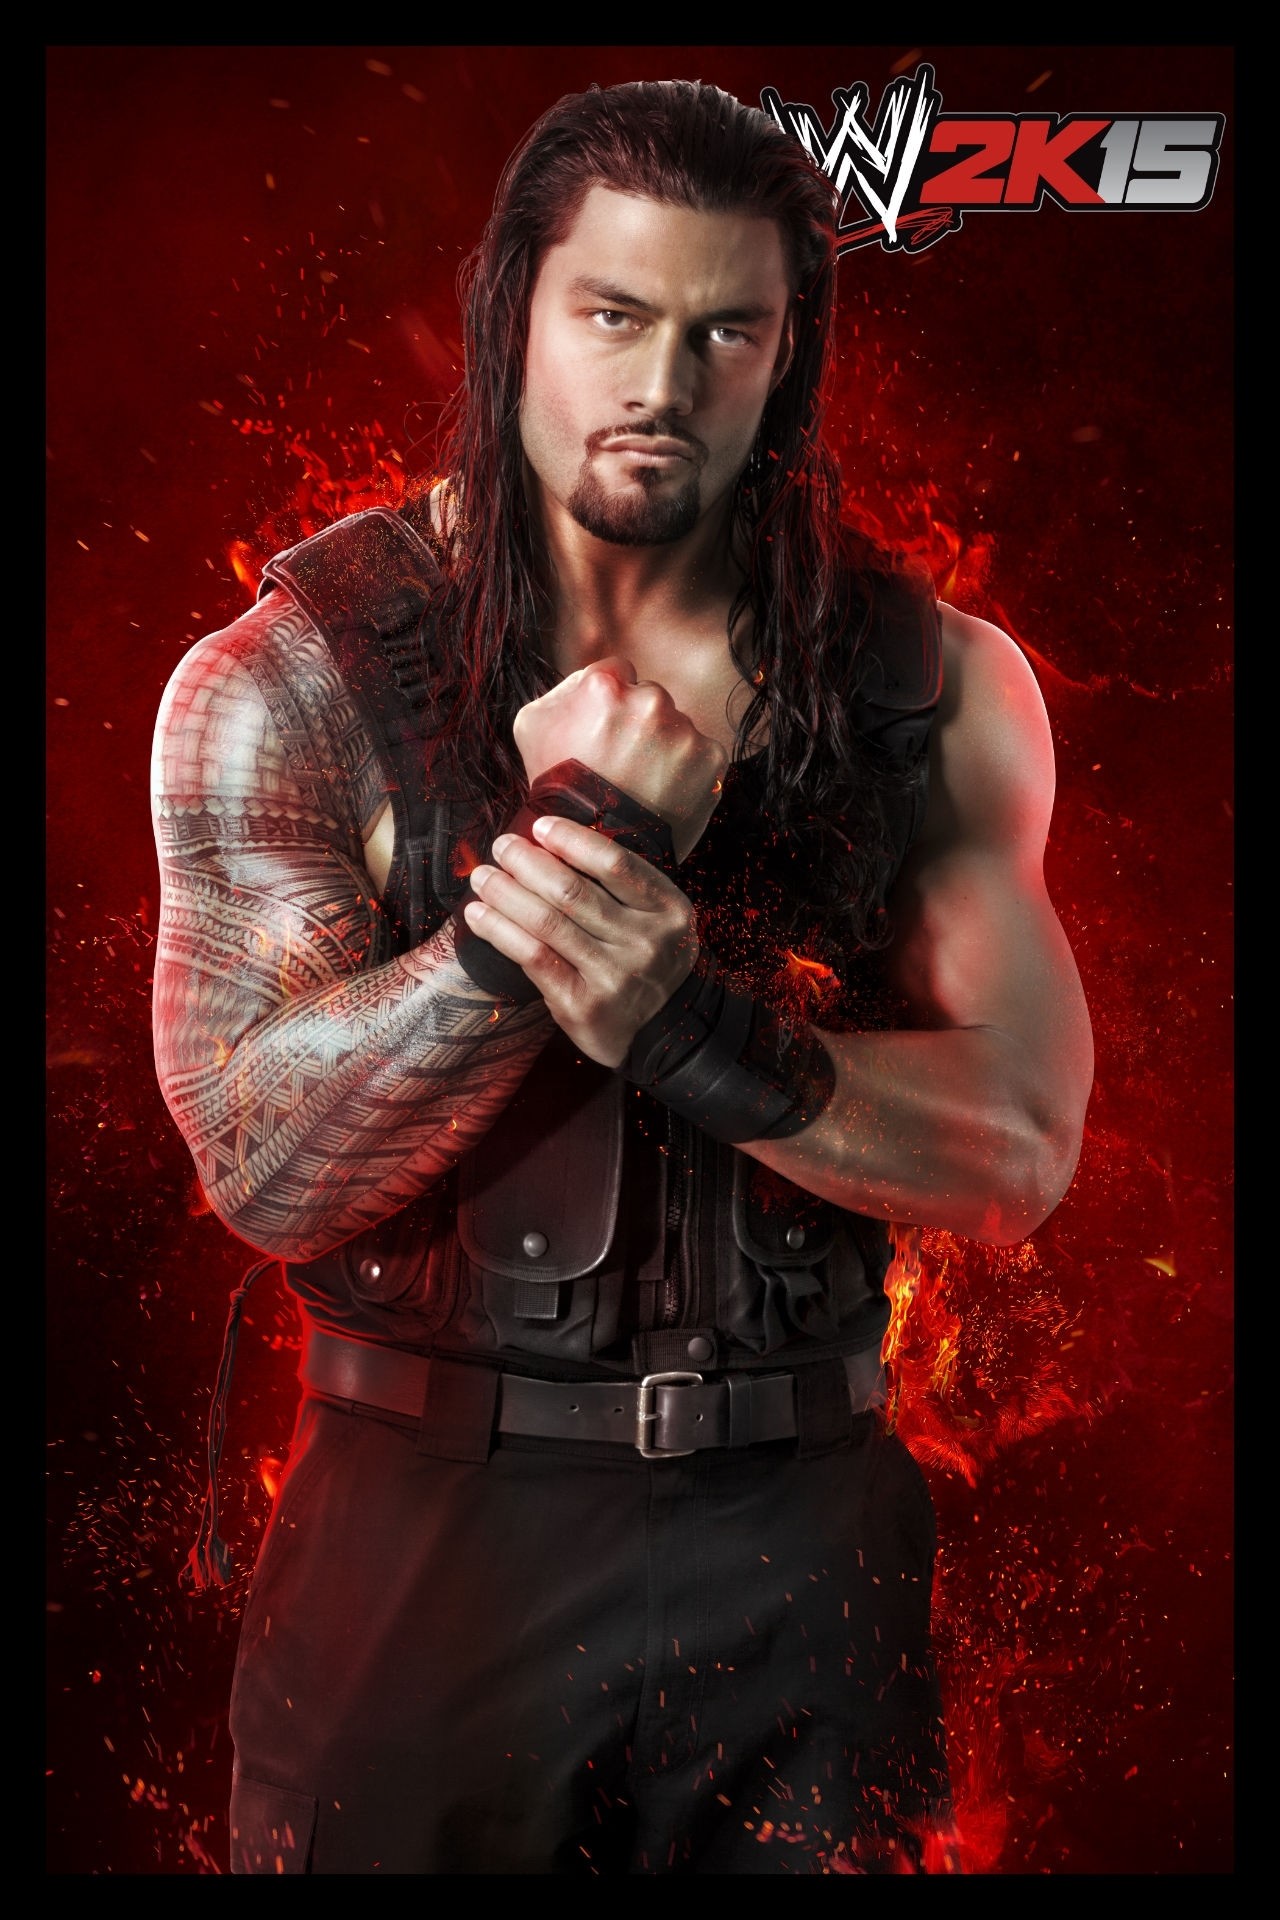 1280x1920 Title : roman reigns images wwe 2k15 hd wallpaper and background photos.  Dimension : 1280 x 1920. File Type : JPG/JPEG